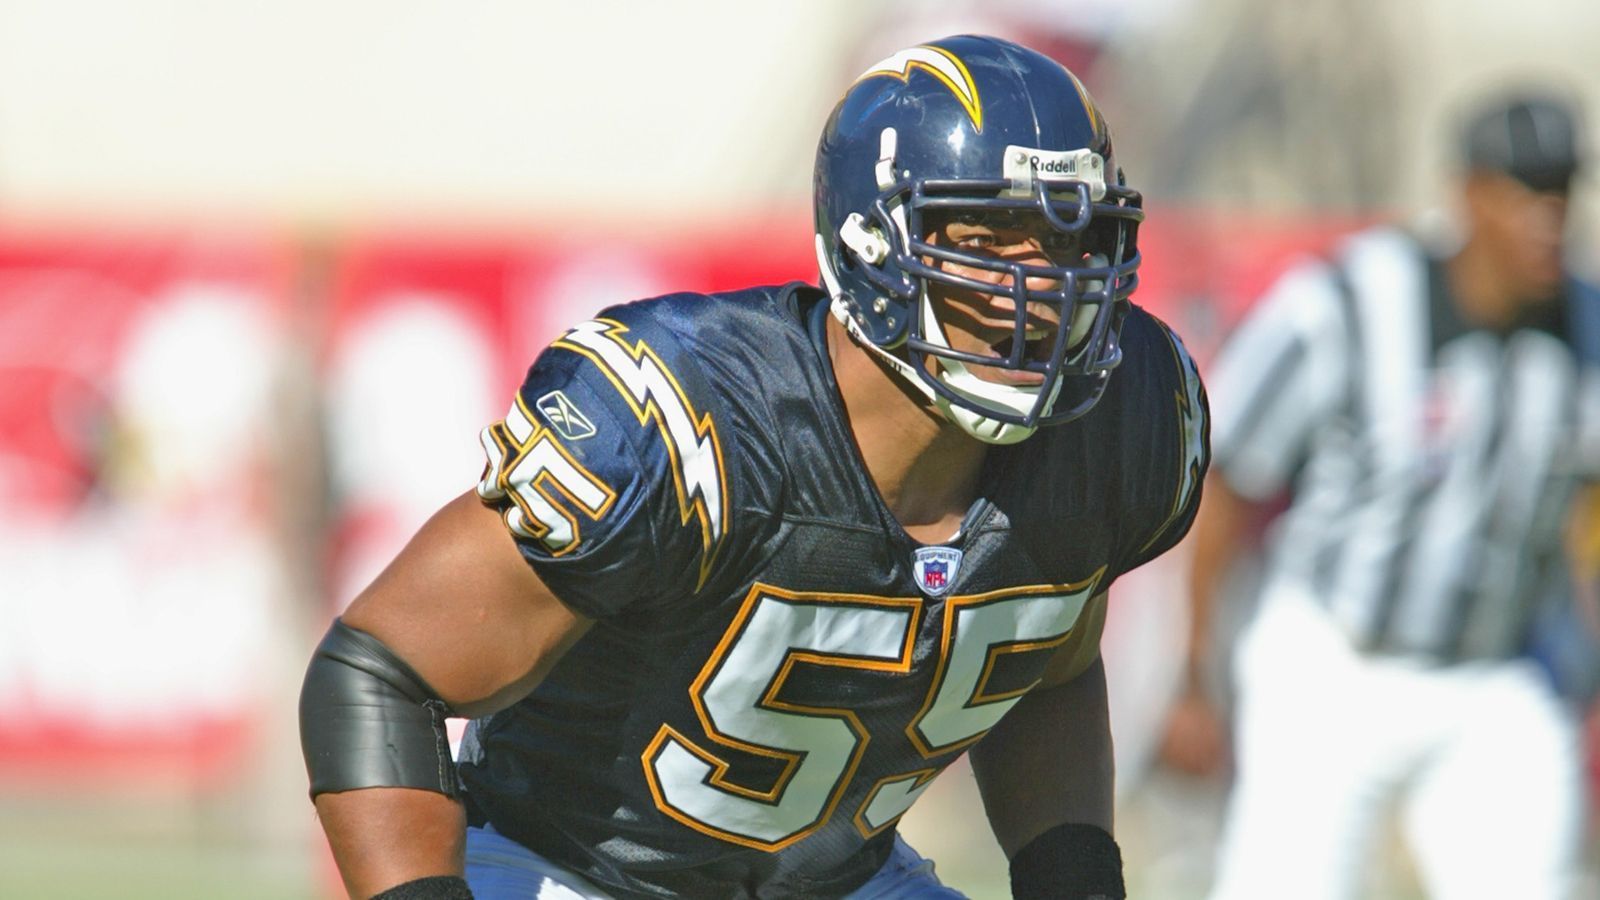 <strong>55: Junior Seau</strong><br>Teams: San Diego Chargers, Miami Dolphins, New England Patriots<br>Position: Linebacker<br>Erfolge: Pro Football Hall of Famer, sechsmaliger First Team All-Pro, zwölfmaliger Pro Bowler<br>Honorable Mention: Derrick Brooks